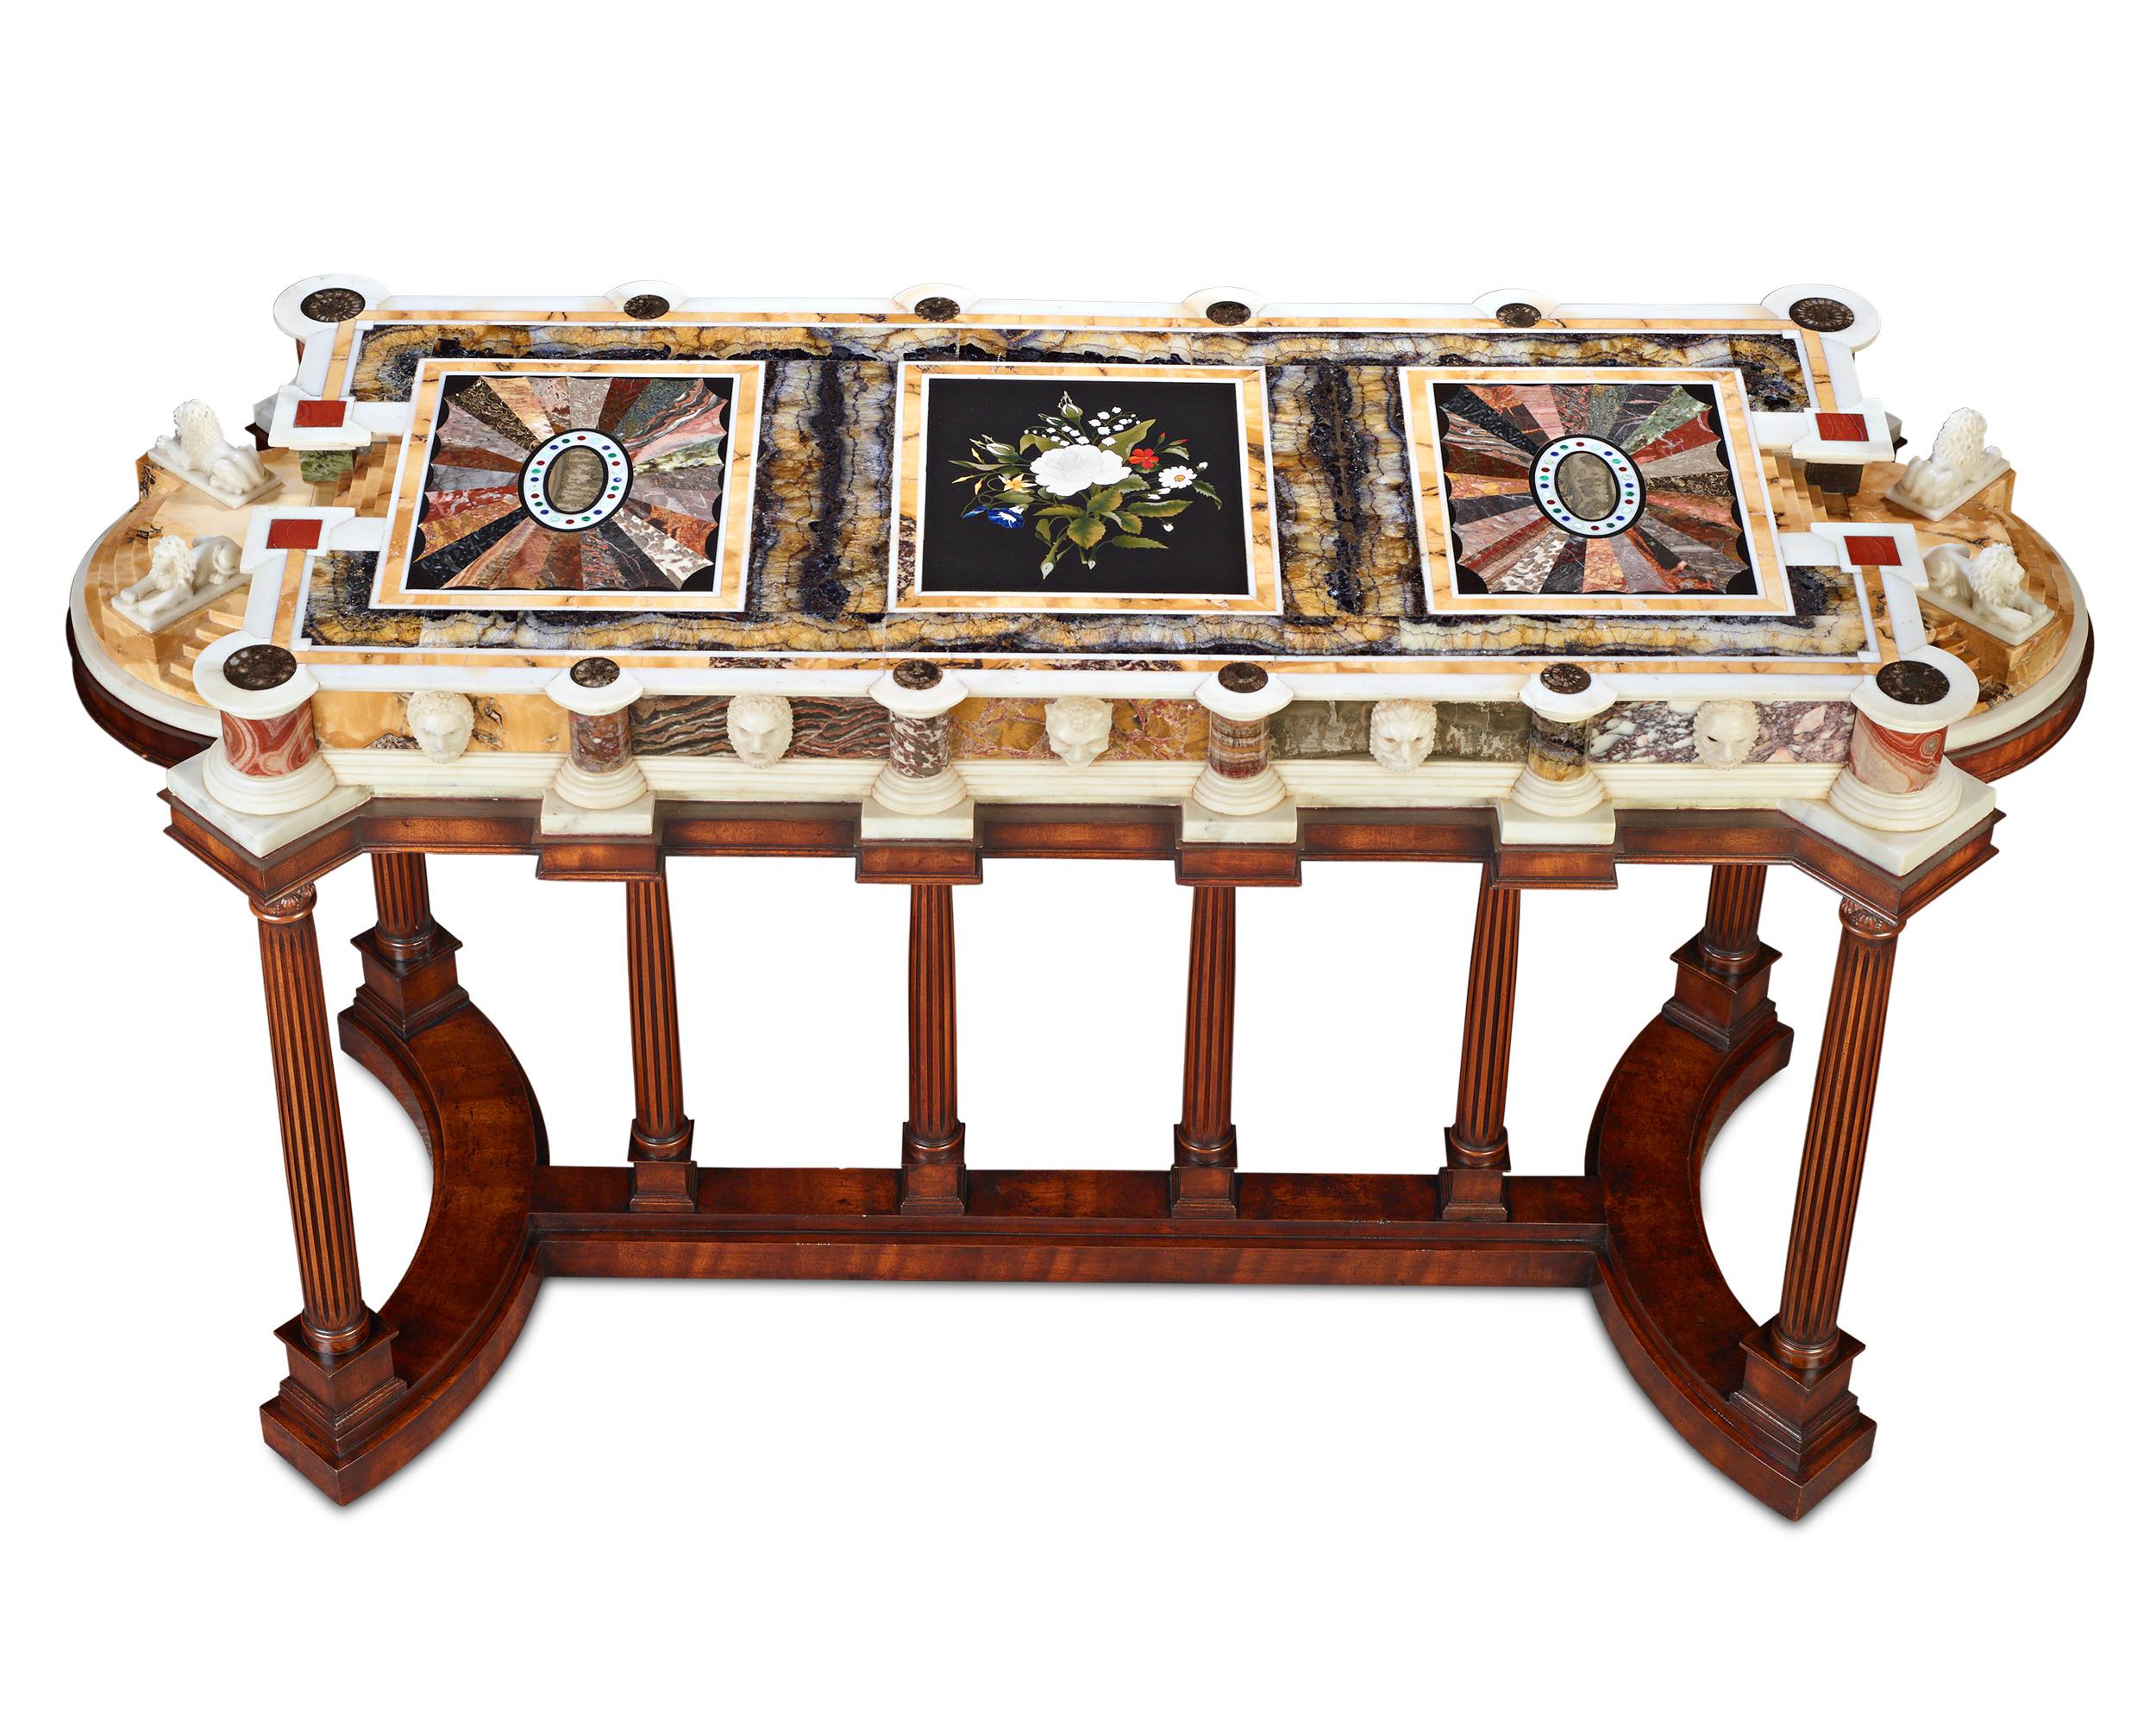 Among the most beautiful examples of hardstone artistry that has ever entered our collection, this important British surtout de table is in a class all its own. Its powerful architectural elegance, timeless Greco-Roman design, impressive size and